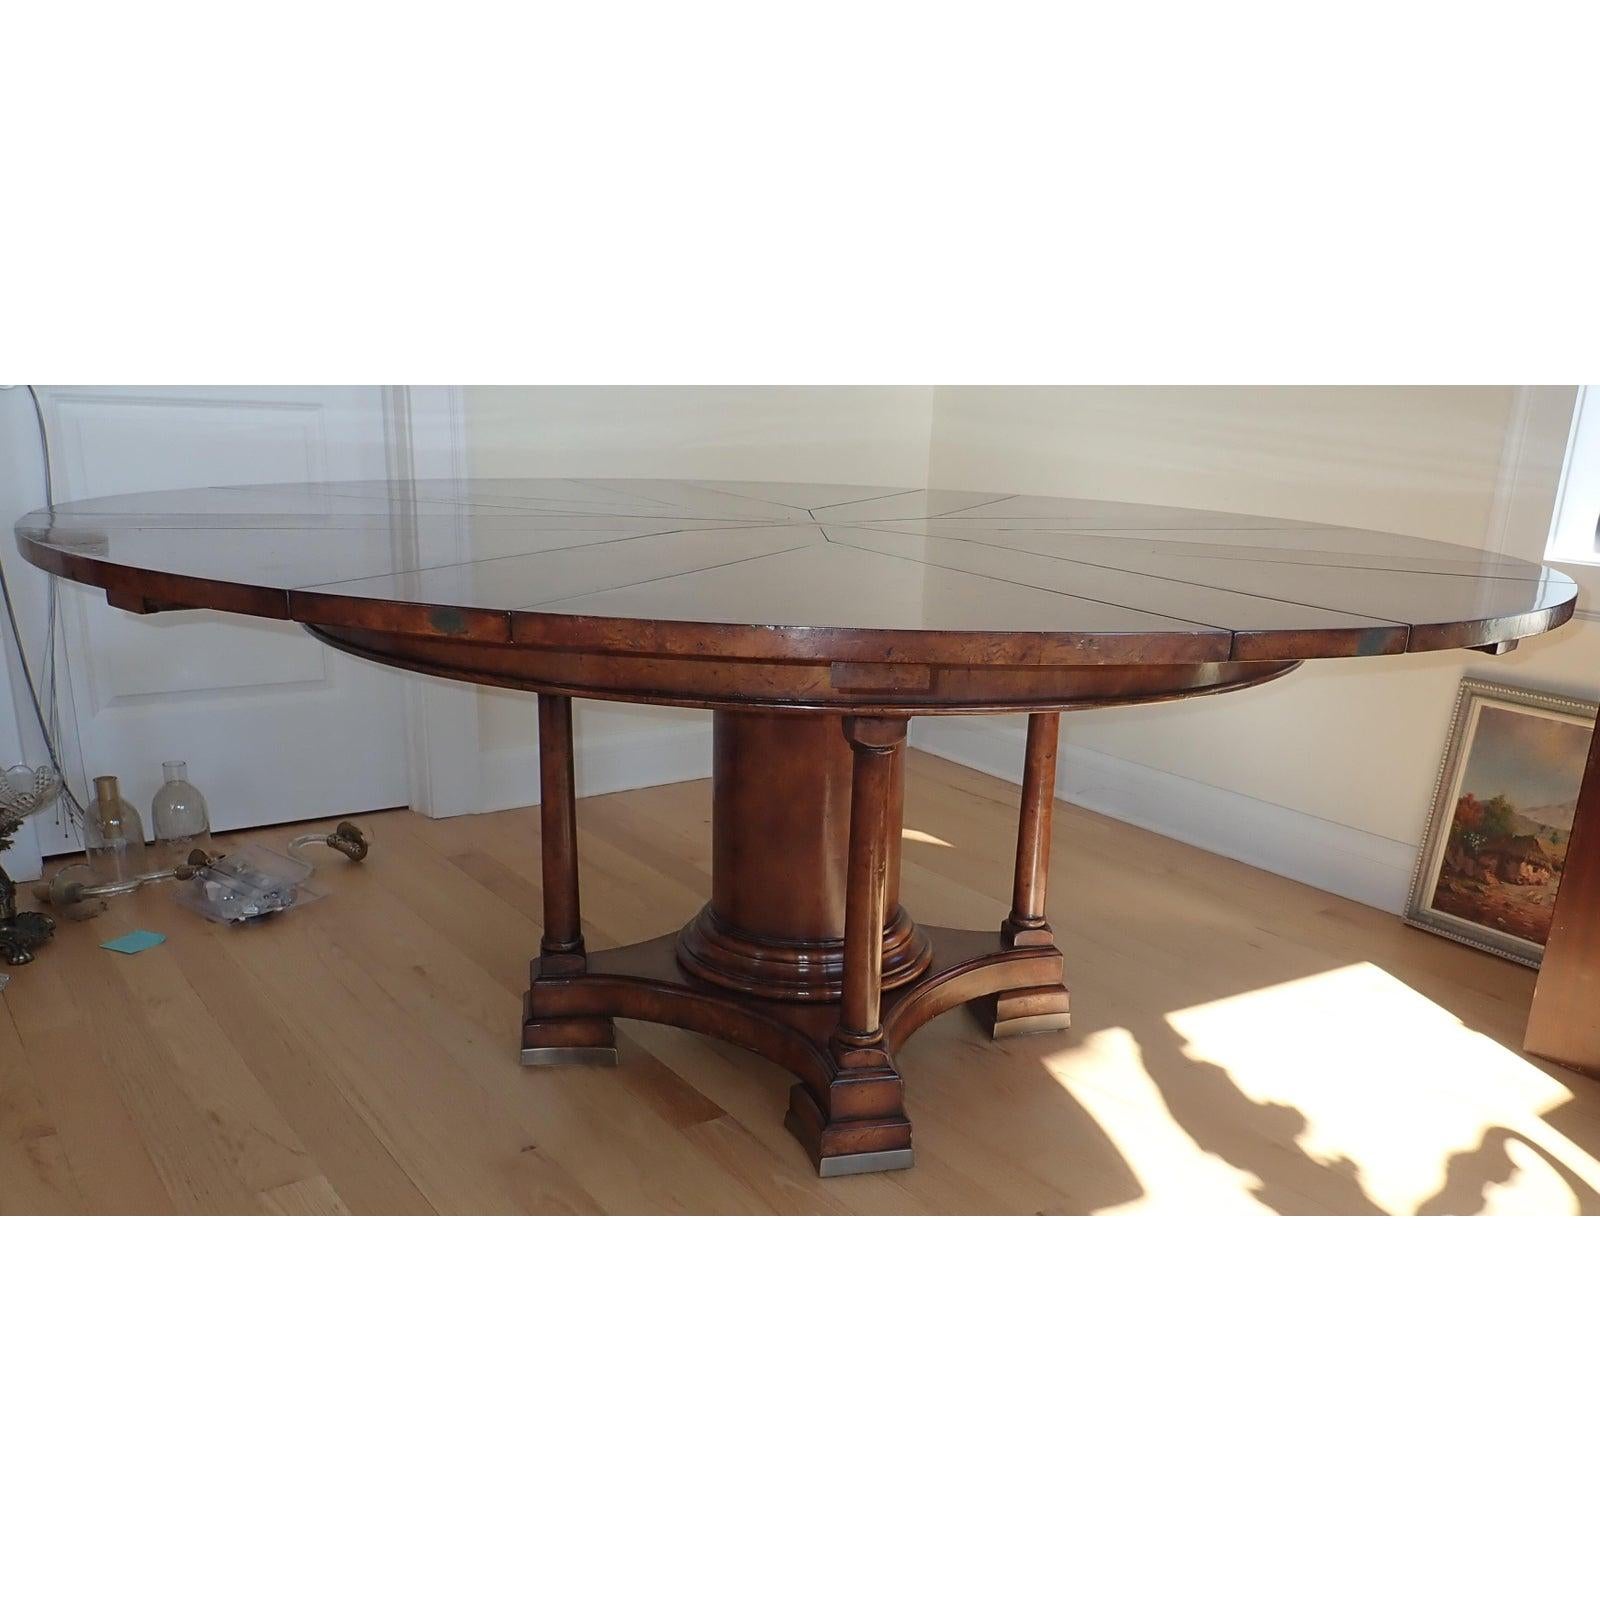 Jupe mechanical extension round dining table. Round mechanical burl wood top sits on a large center column surrounded by 4 smaller columns and curved footed base. 8 leaves.

Closed Dimensions 55ʺW × 55ʺD × 30ʺH
Open Diameter 74